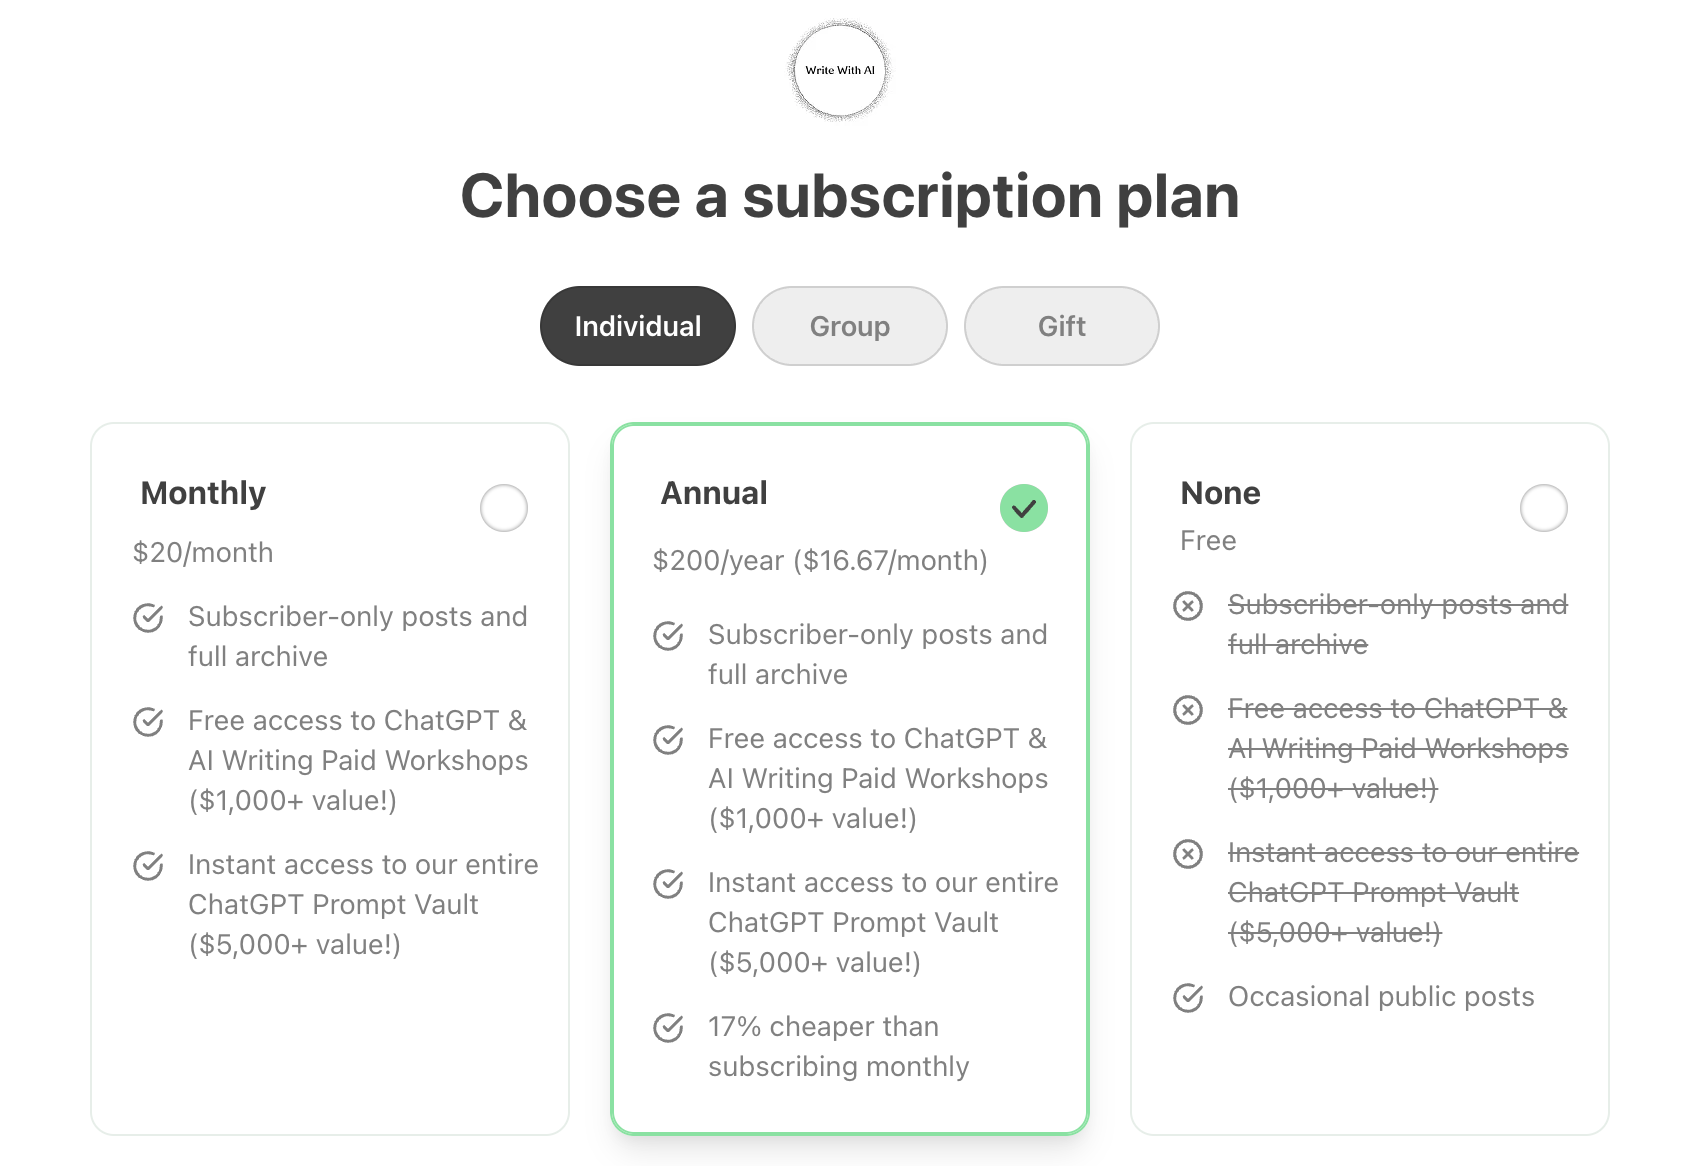 subscription options for Write with AI newsletter